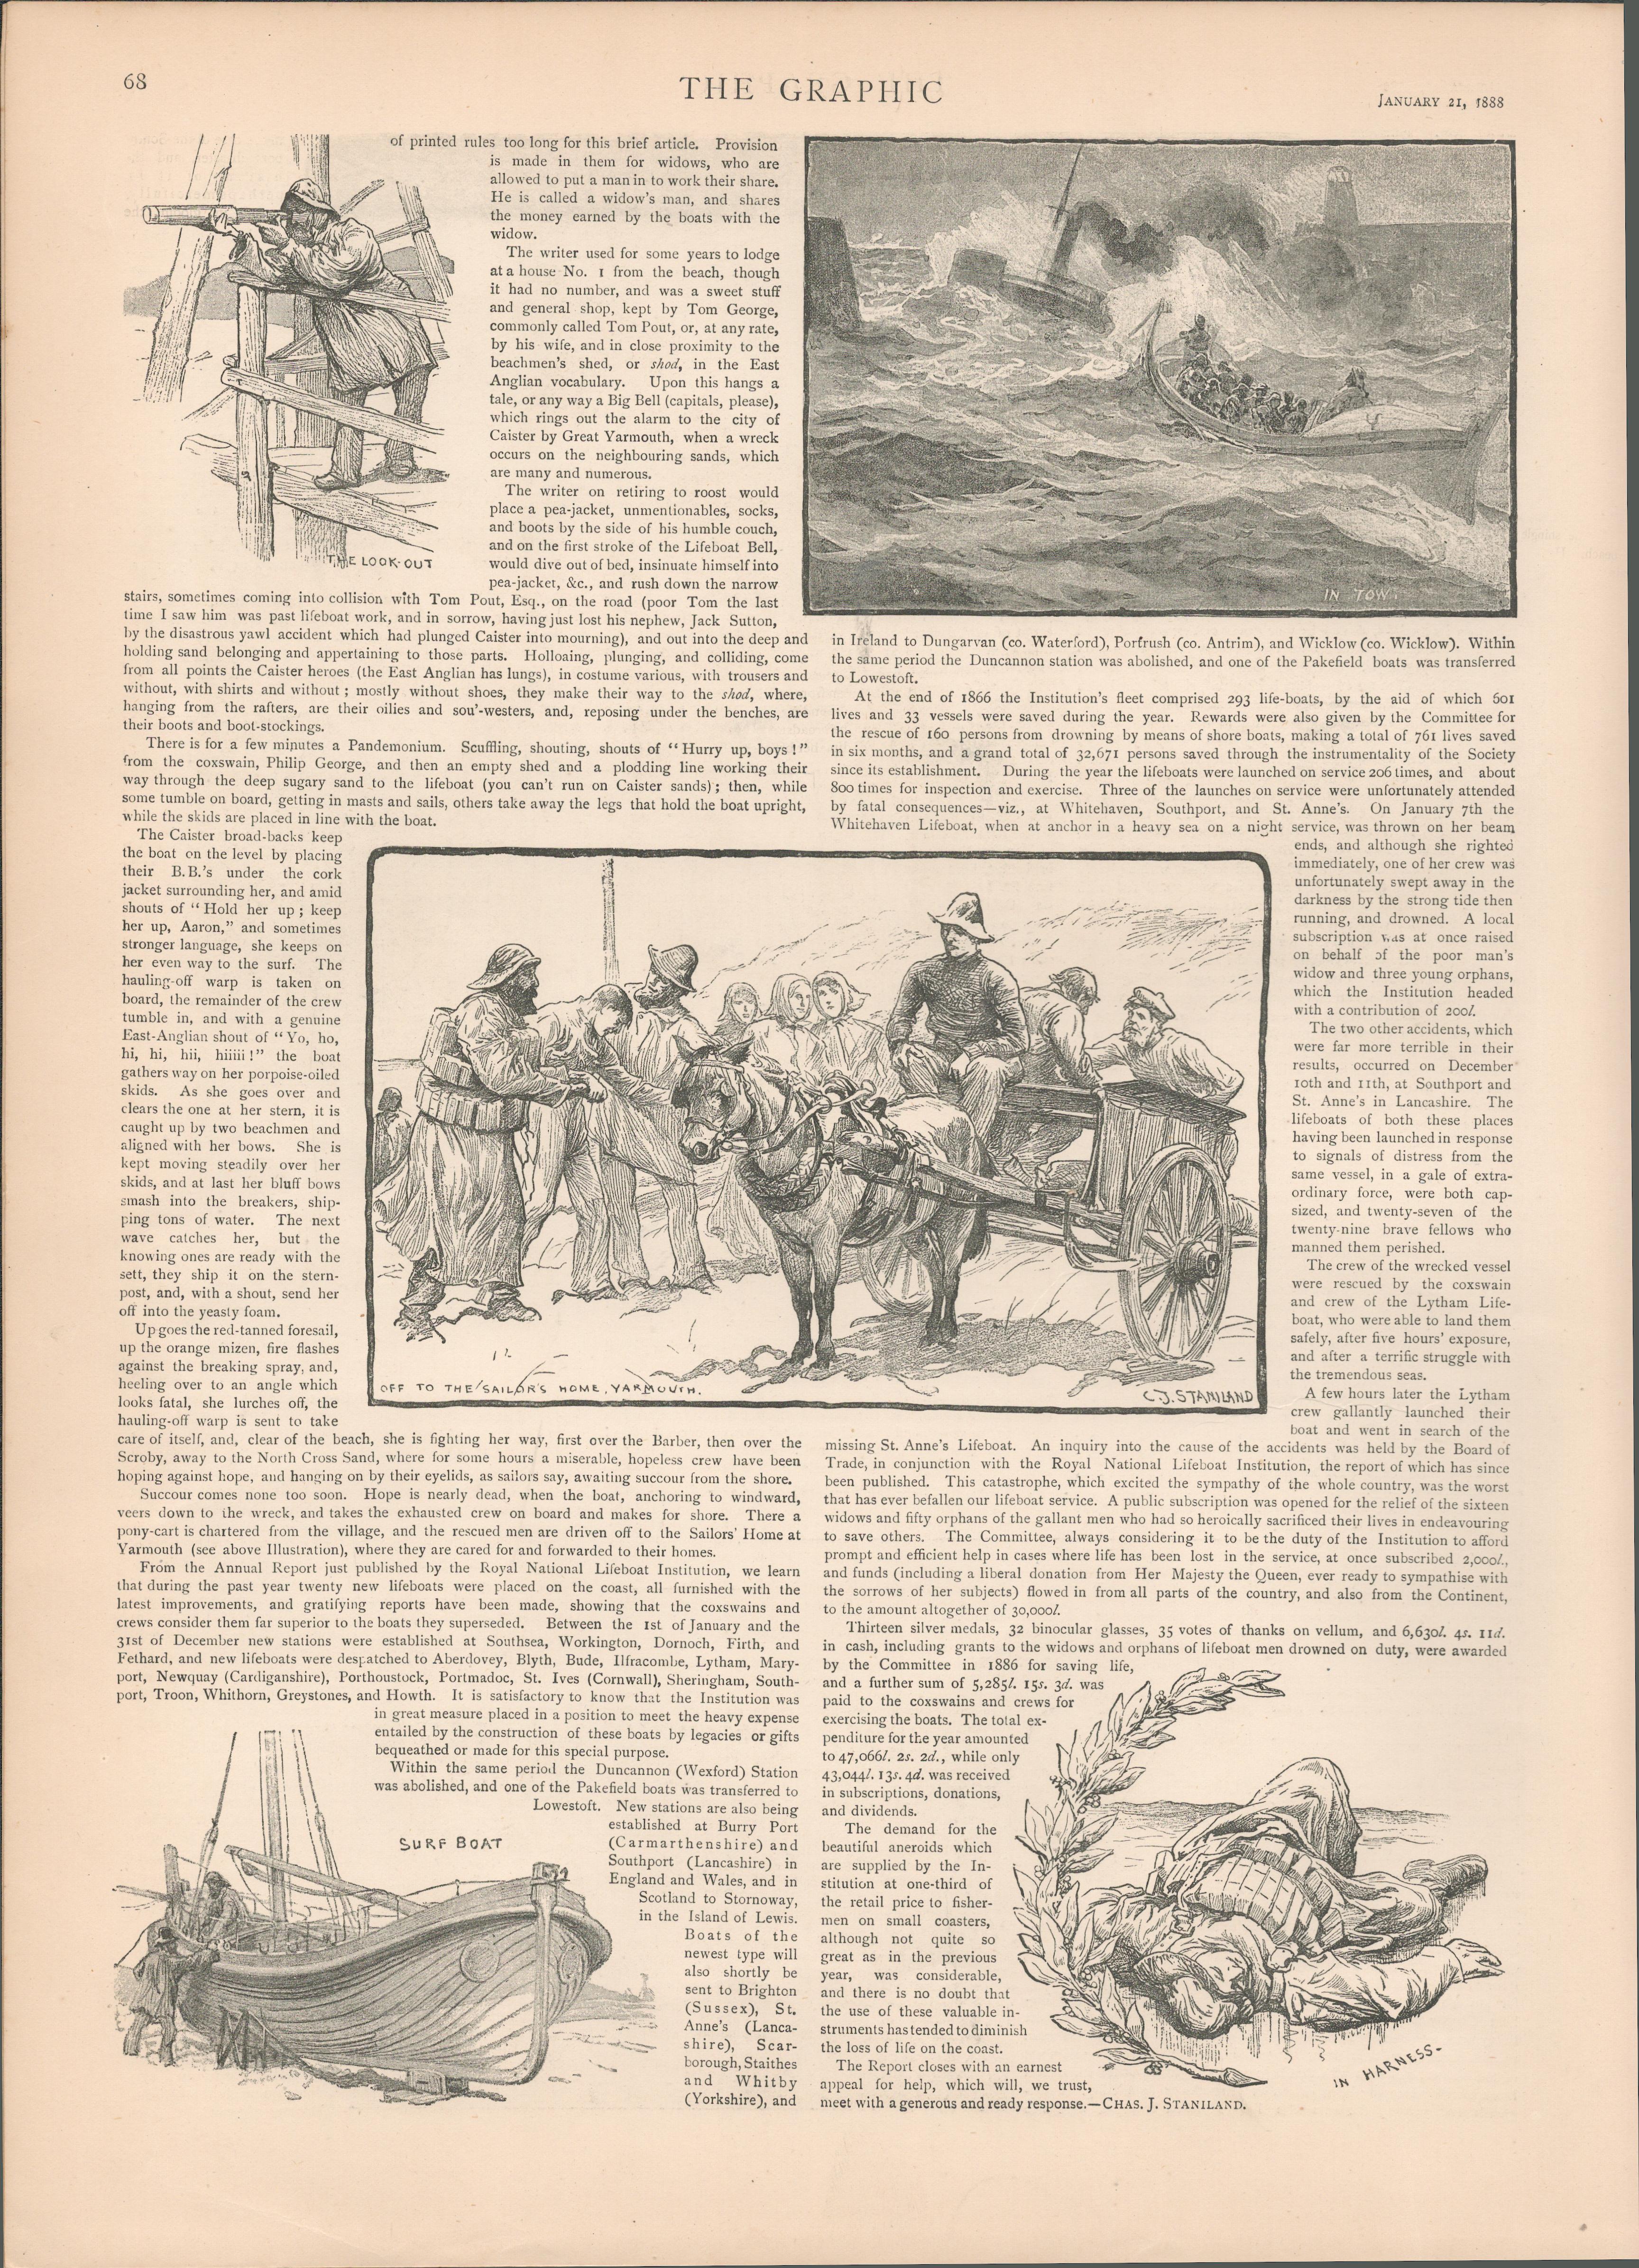 RNLI 4-Page Victorian 1888 Antique Supplement - Image 4 of 4